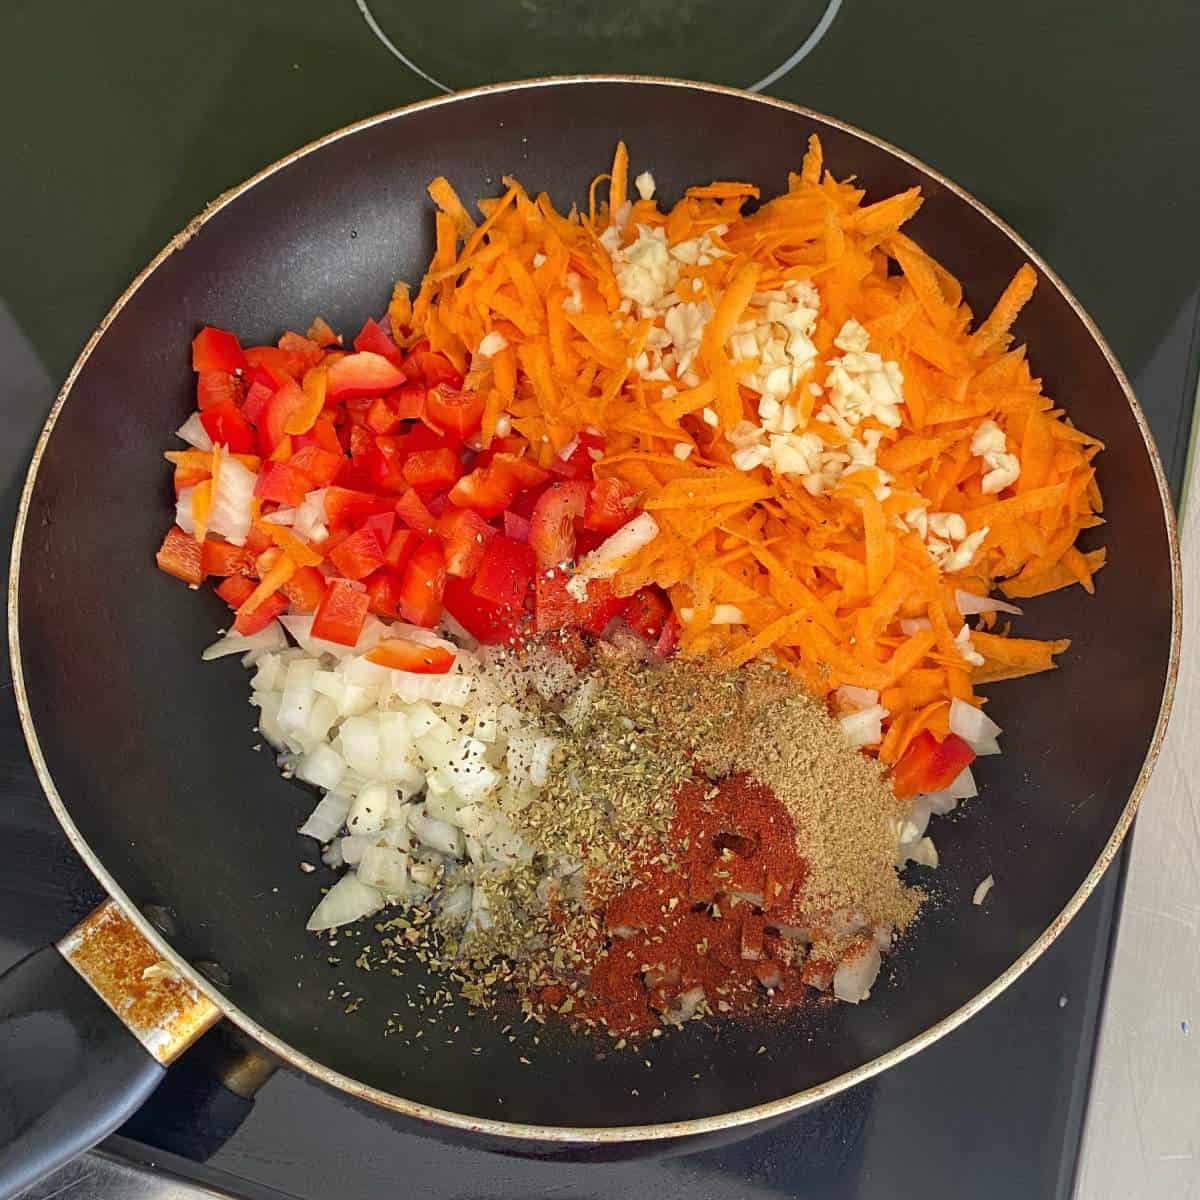 The vegetables, herbs and spices being fried in a fry pan over a medium heat